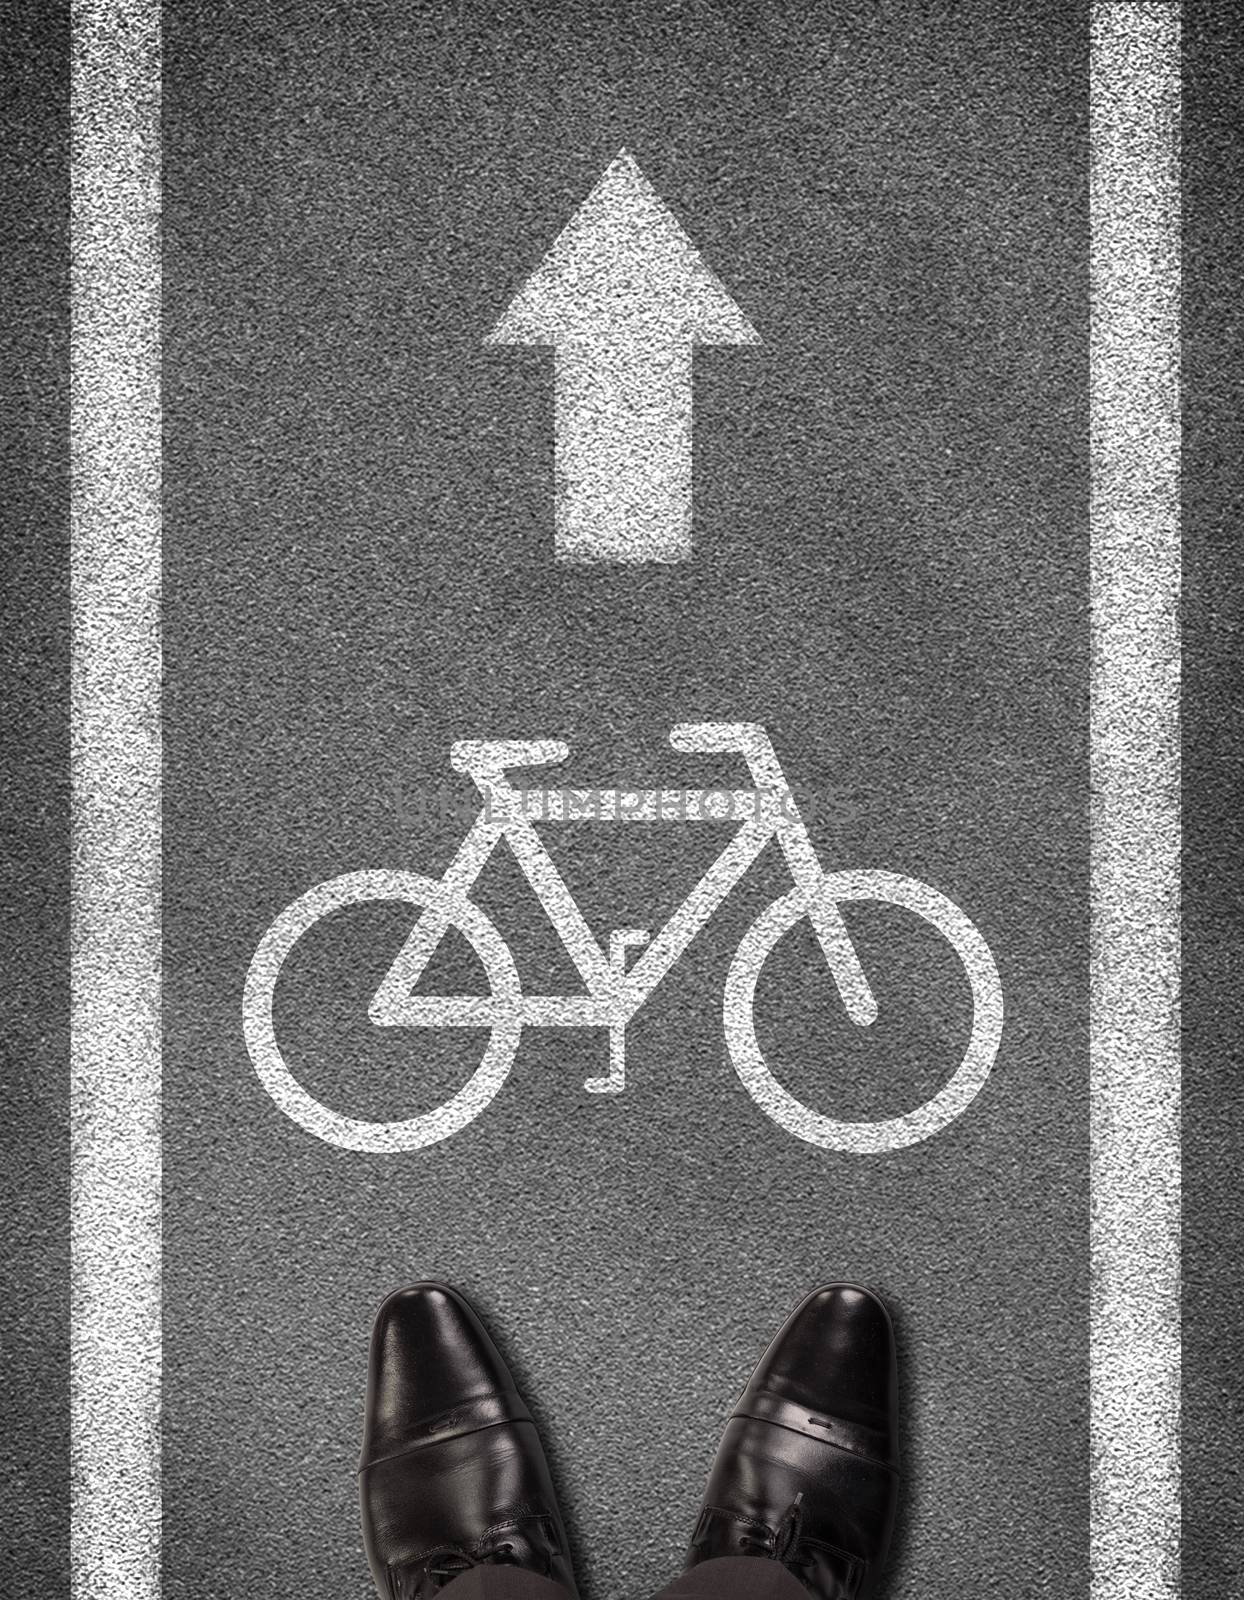 Top view of shoes standing on asphalt road with two line and bicycle sign. Business concept